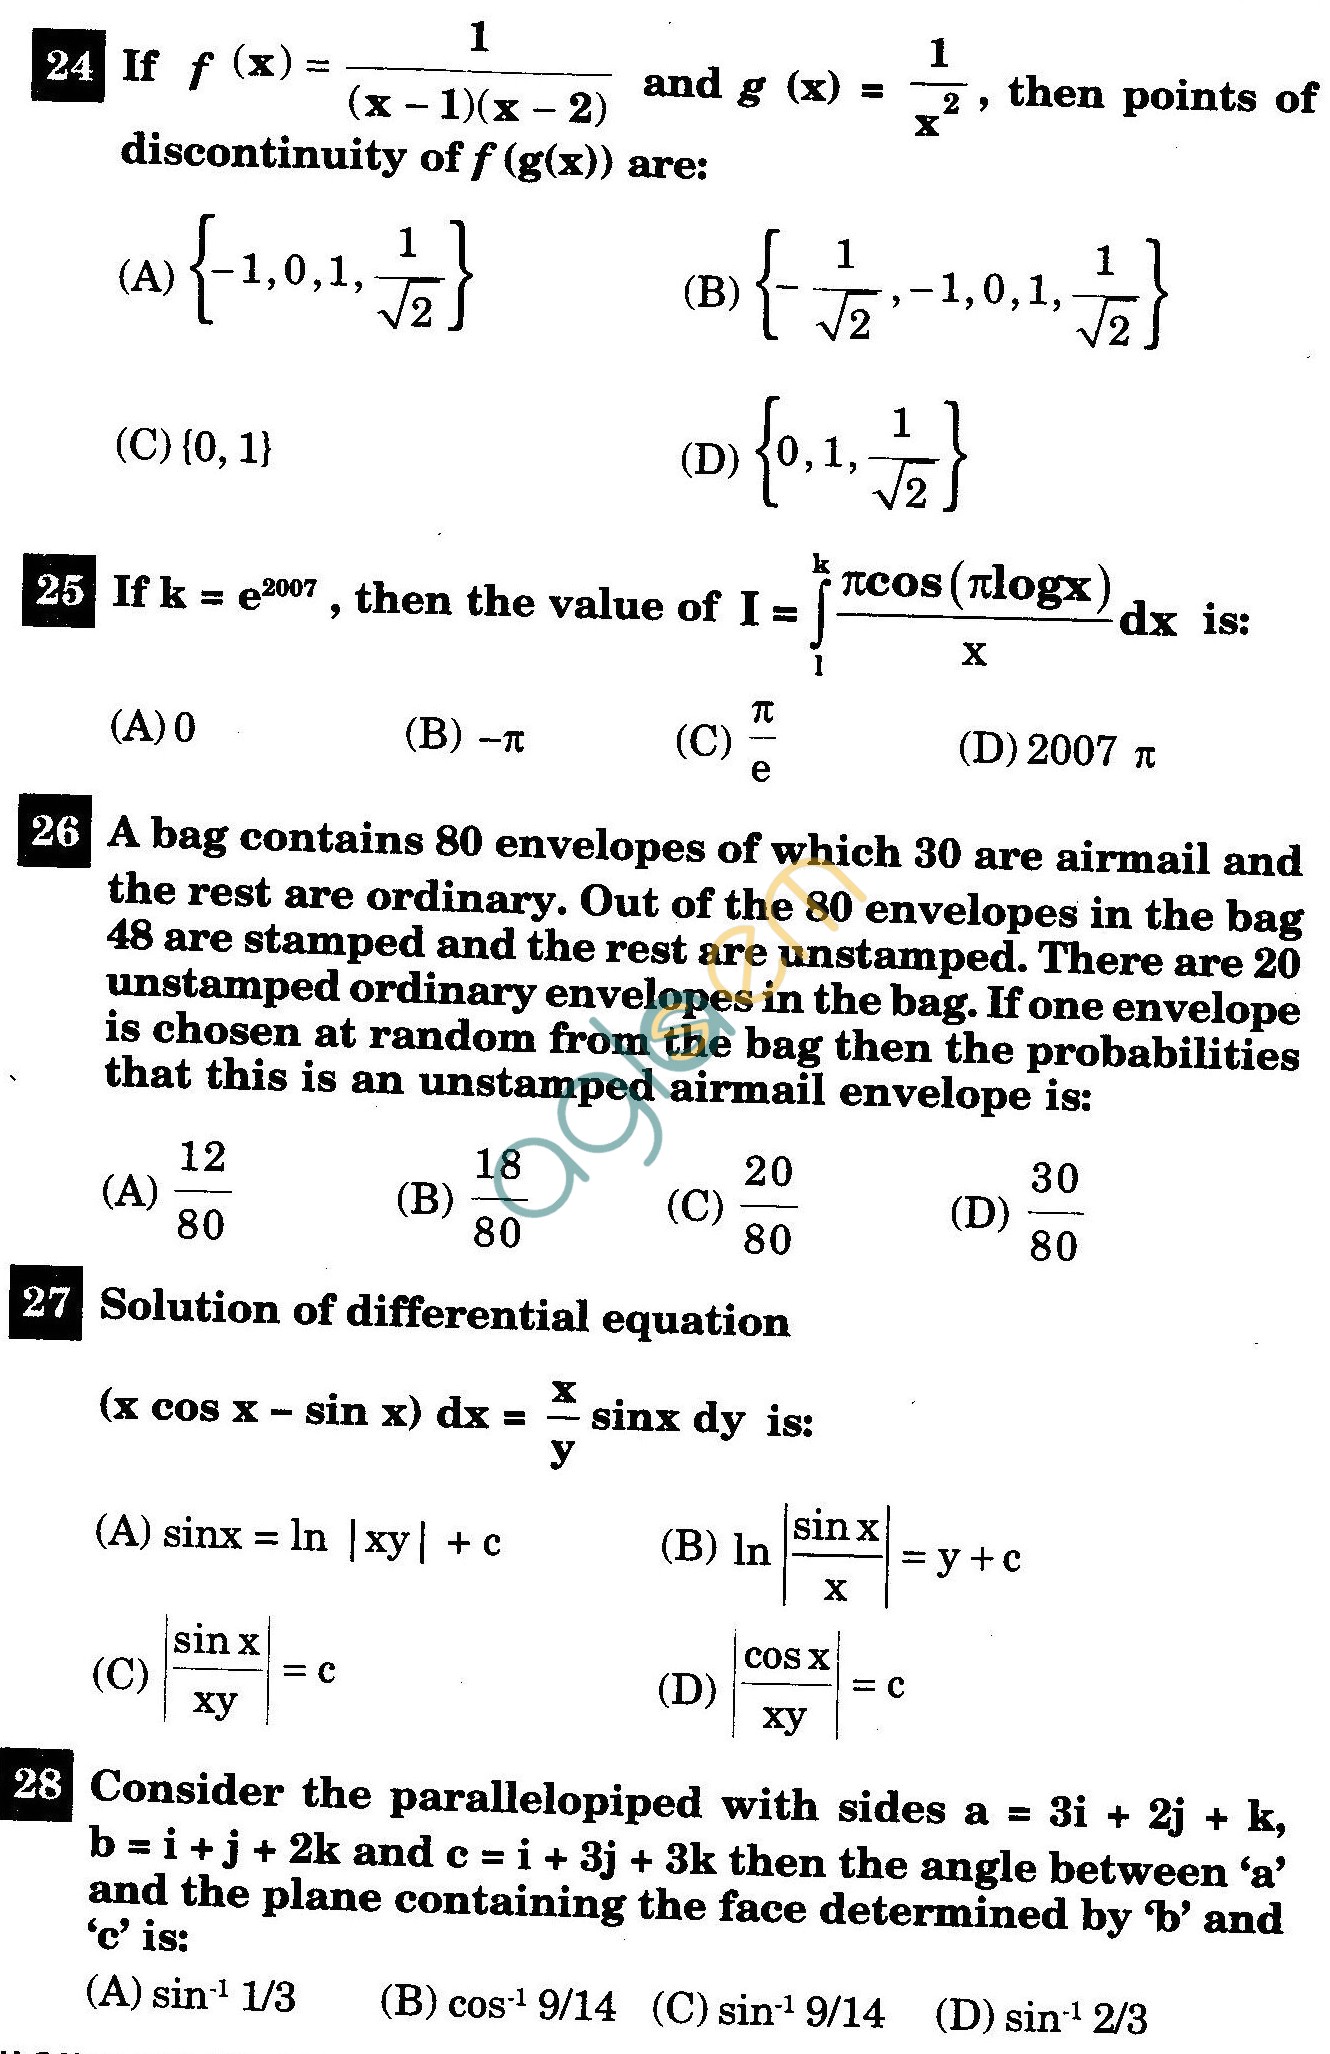 NSTSE 2011 Class XII PCM Question Paper with Answers - Mathematics